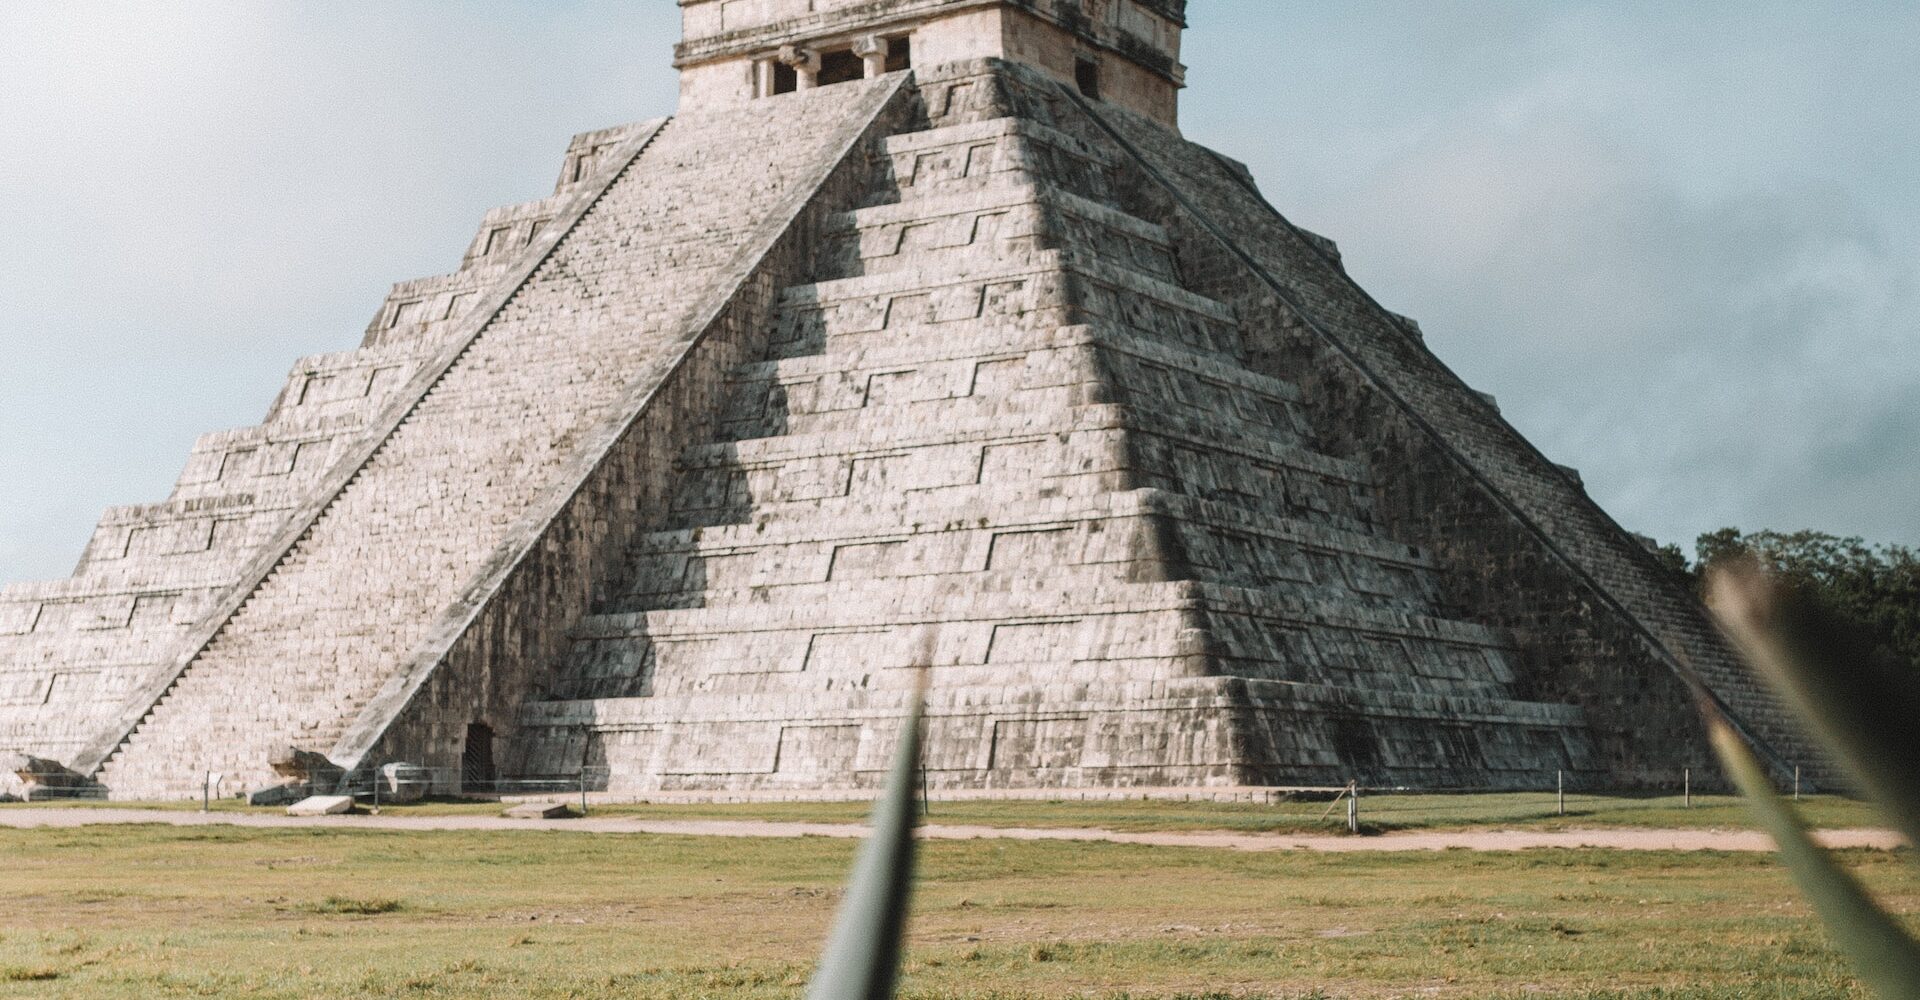 What You Need To Know About The Ancient Mayan Ruins